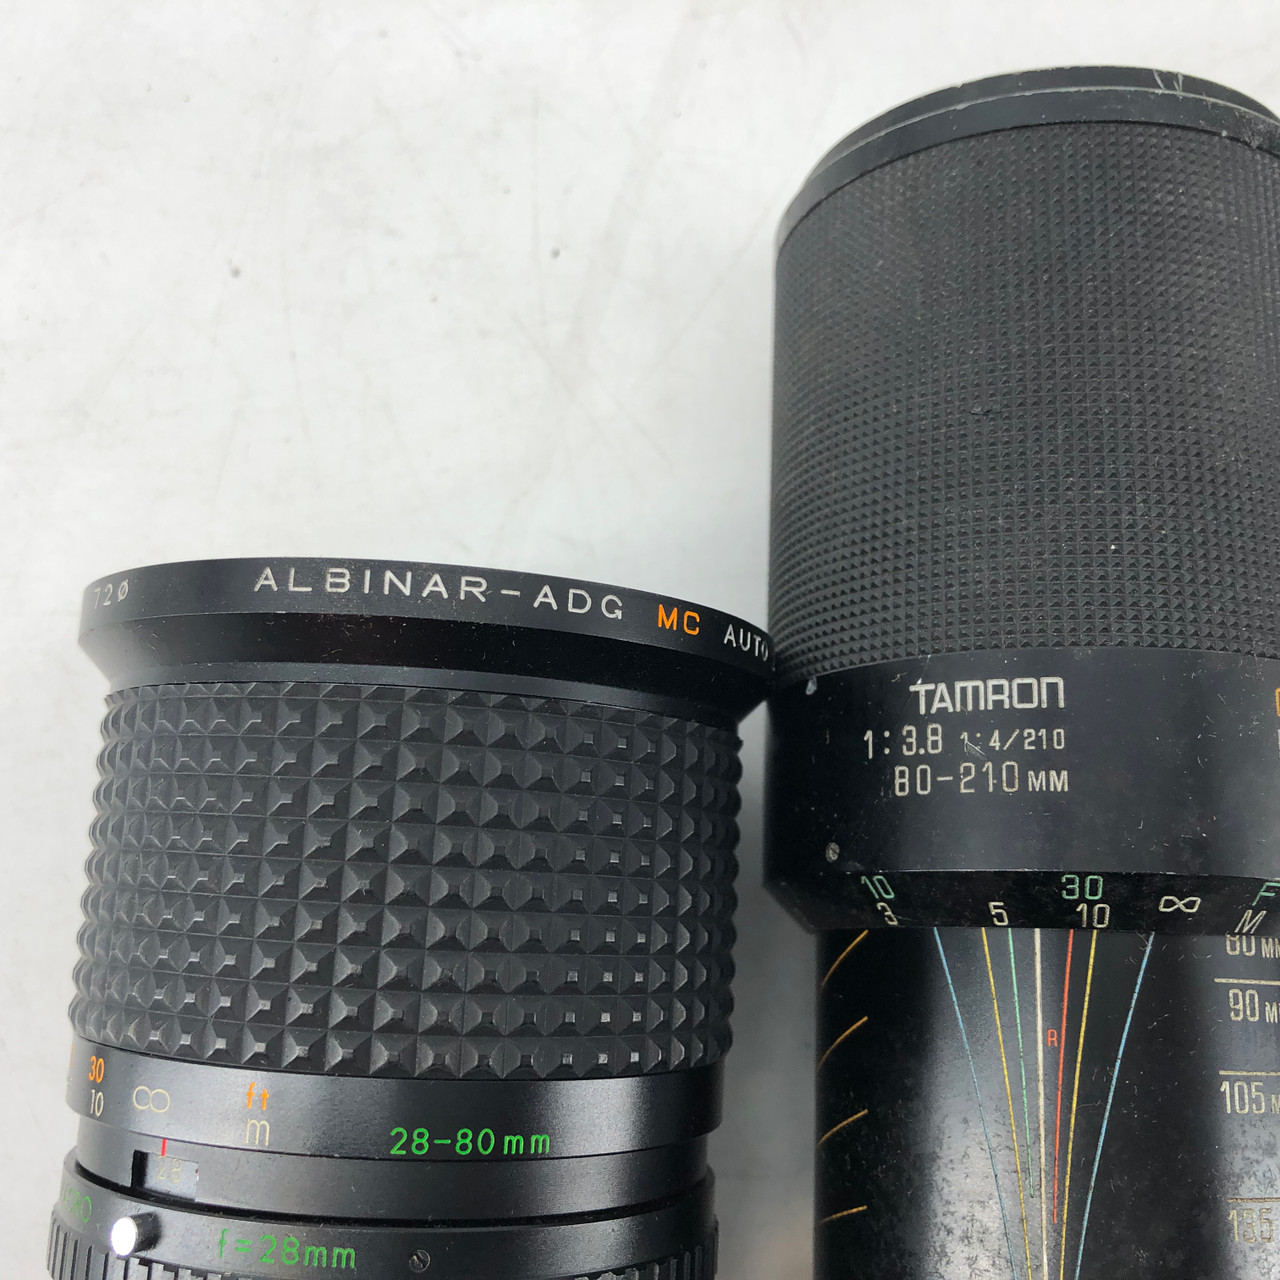 ASSORTED MF 11 LENSES FROM VIVATAR, MINOLTA, PENTAX AND MORE